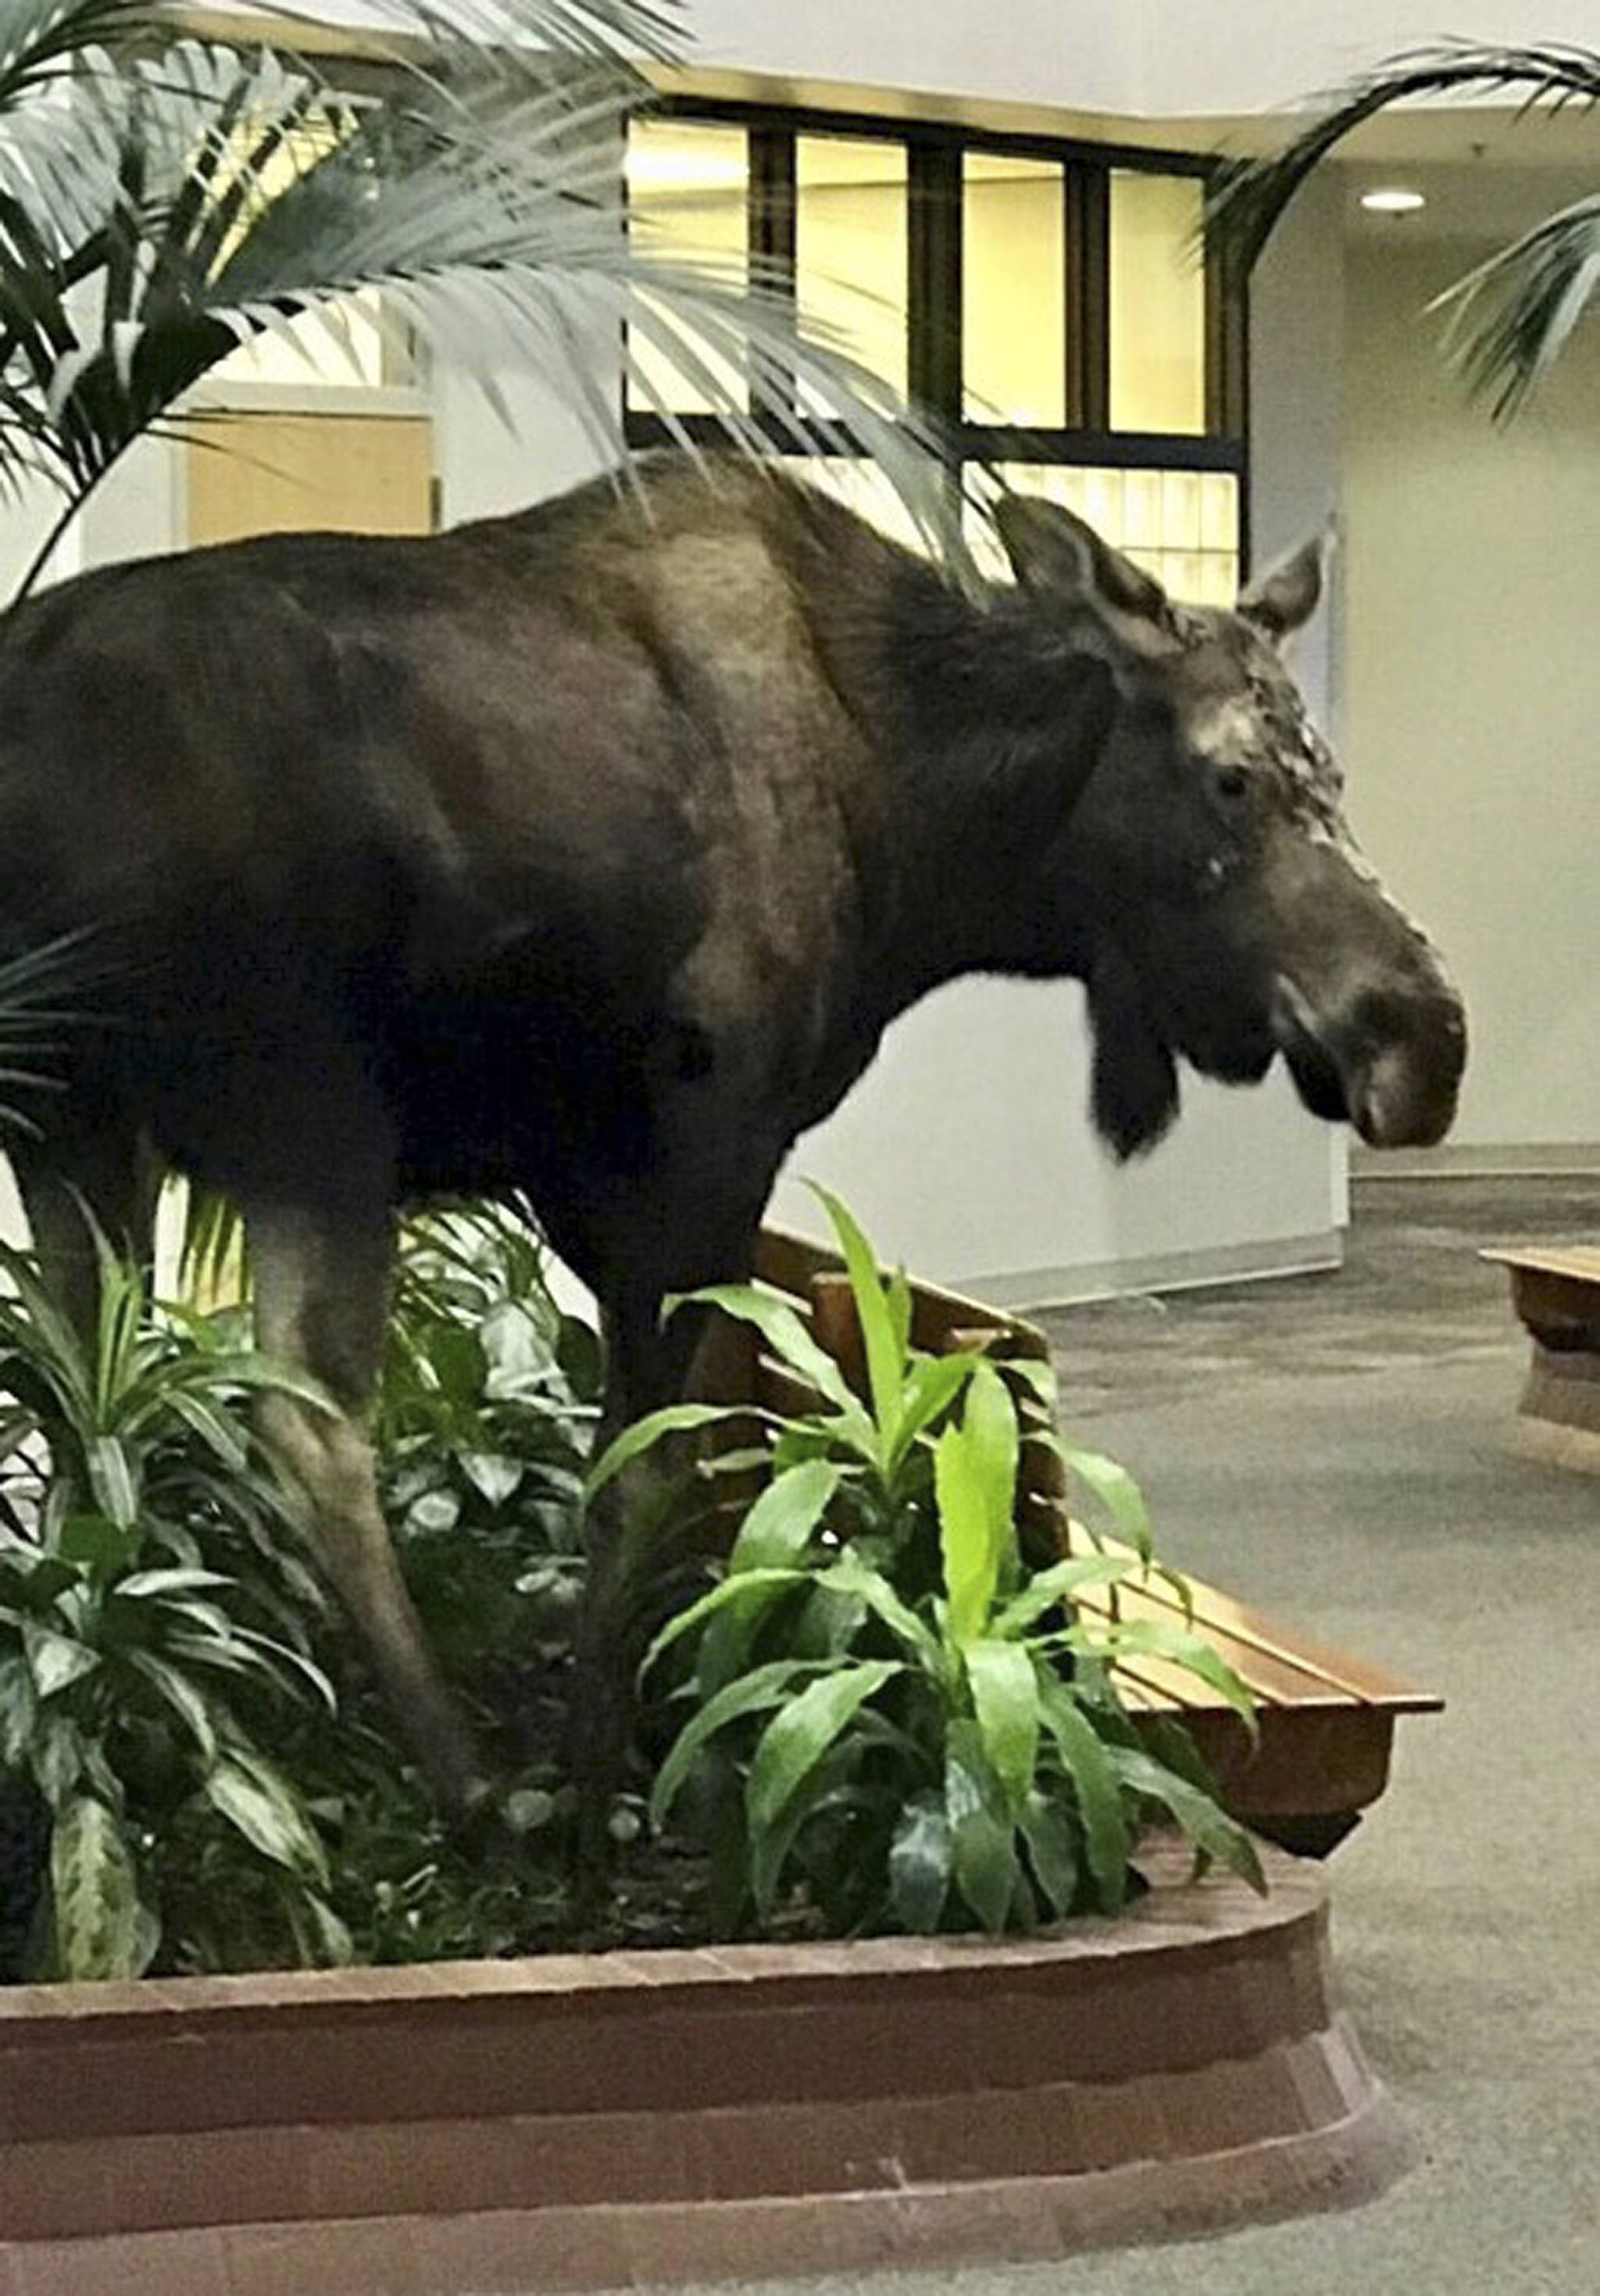 This Jan. 7, 2019 photo provided by Anchorage Regional Hospital shows a moose that had wandered into its therapy facility in Anchorage, Alaska, through doors that were stuck open because of extreme cold temperatures. The moose chomped on some plants in the lobby and stuck around for about 10 minutes before leaving the building. (Alaska Regional Hospital via the Associated Press)